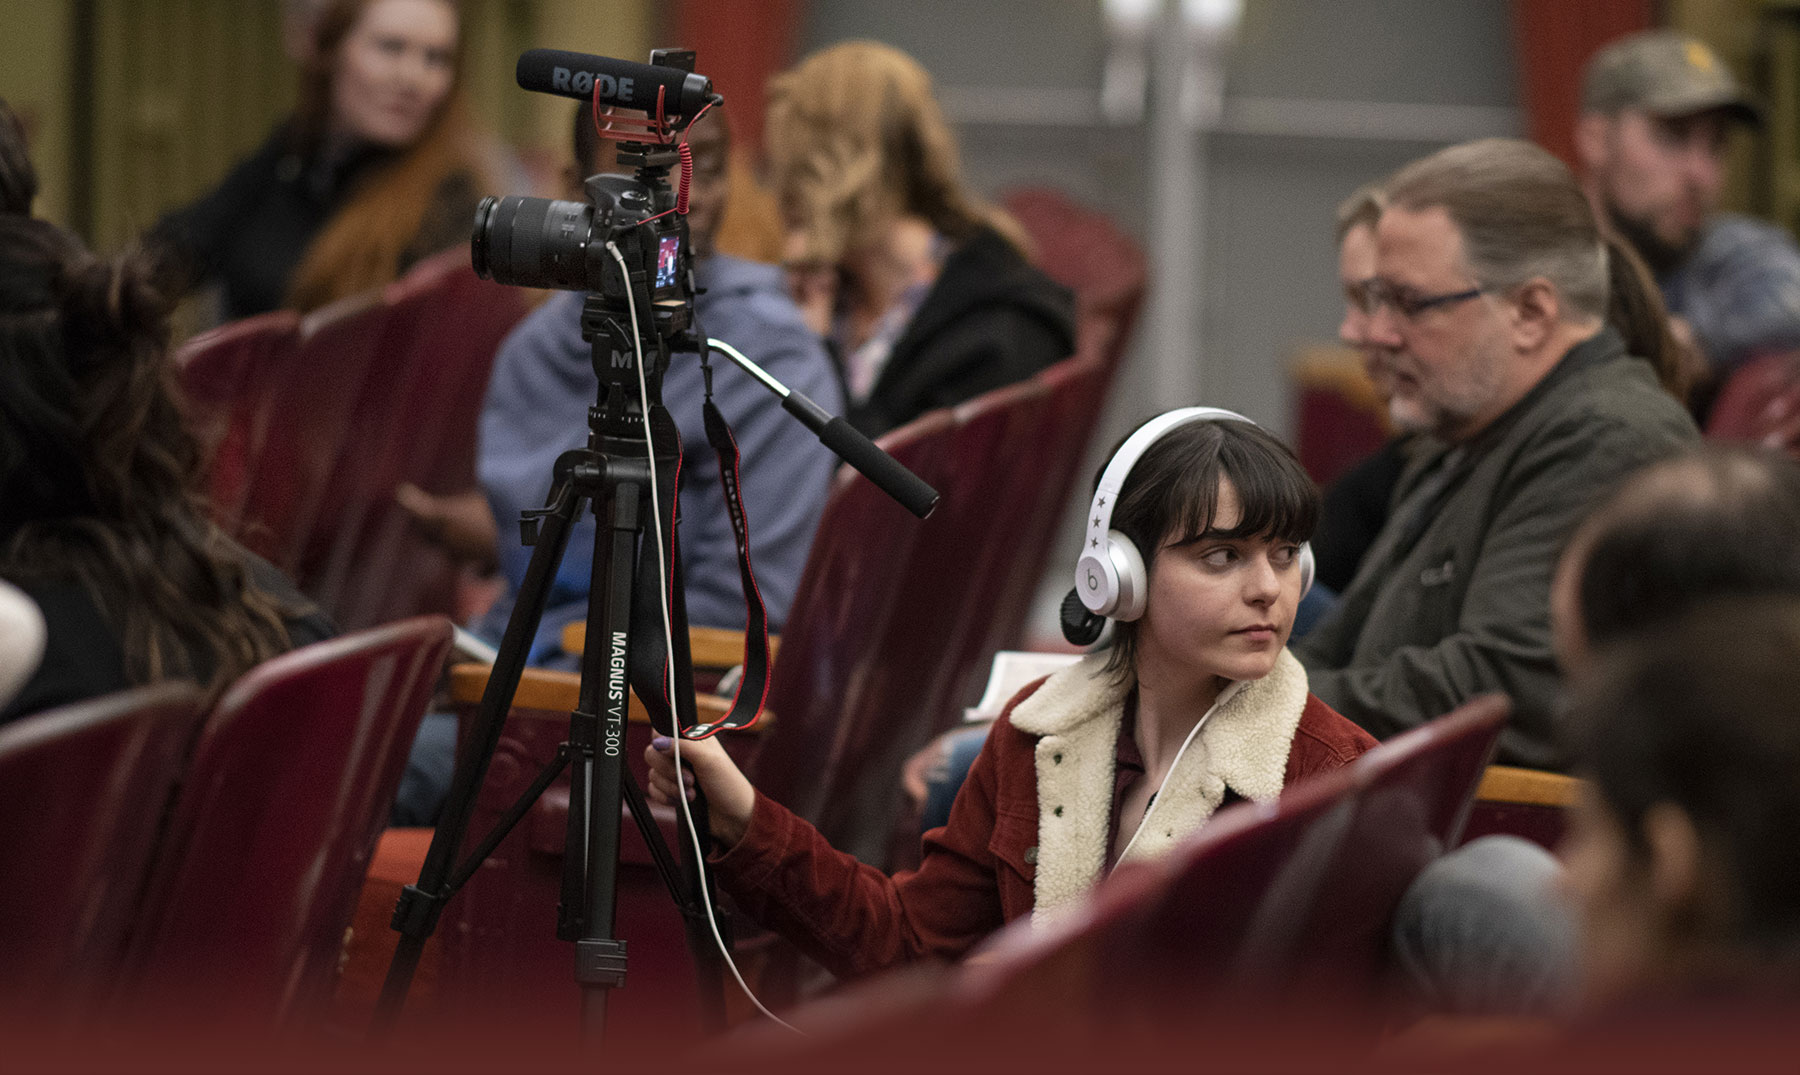 A student with headphones and a camera prepares to film a lecture.